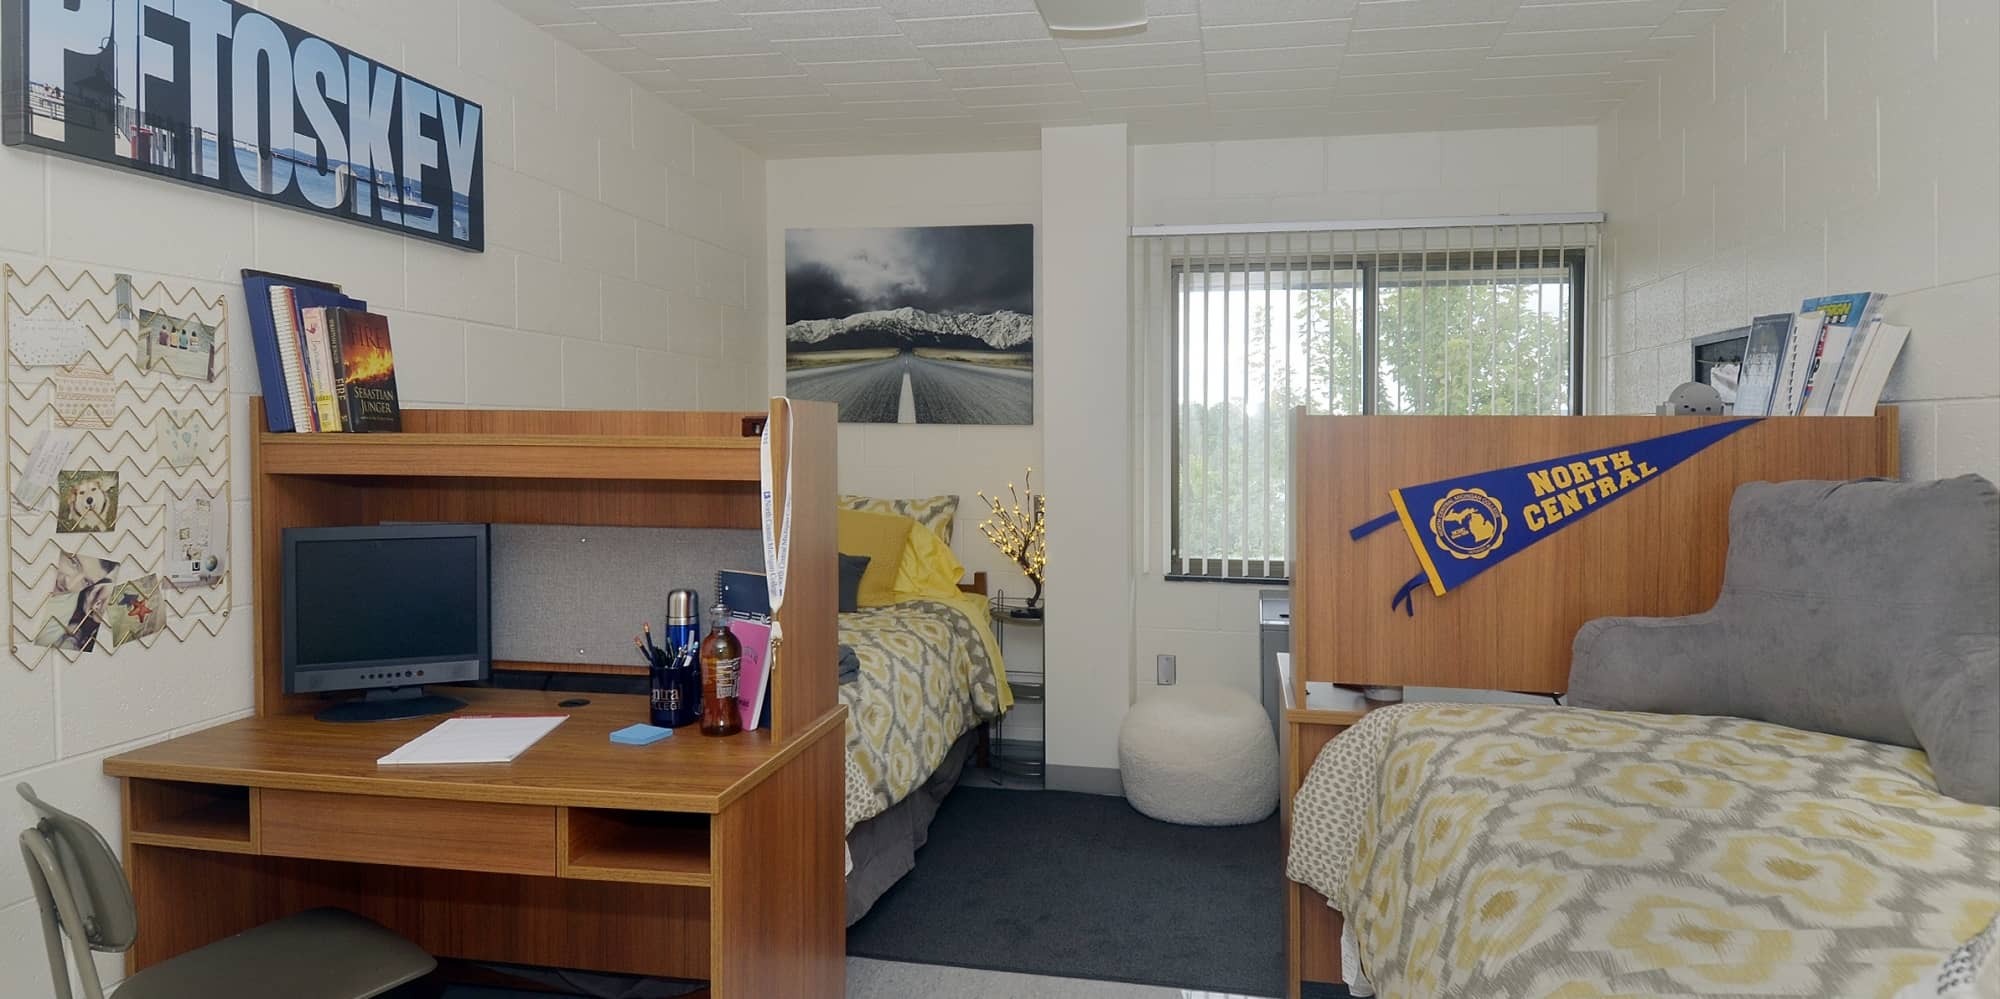 North Central Dorm Room